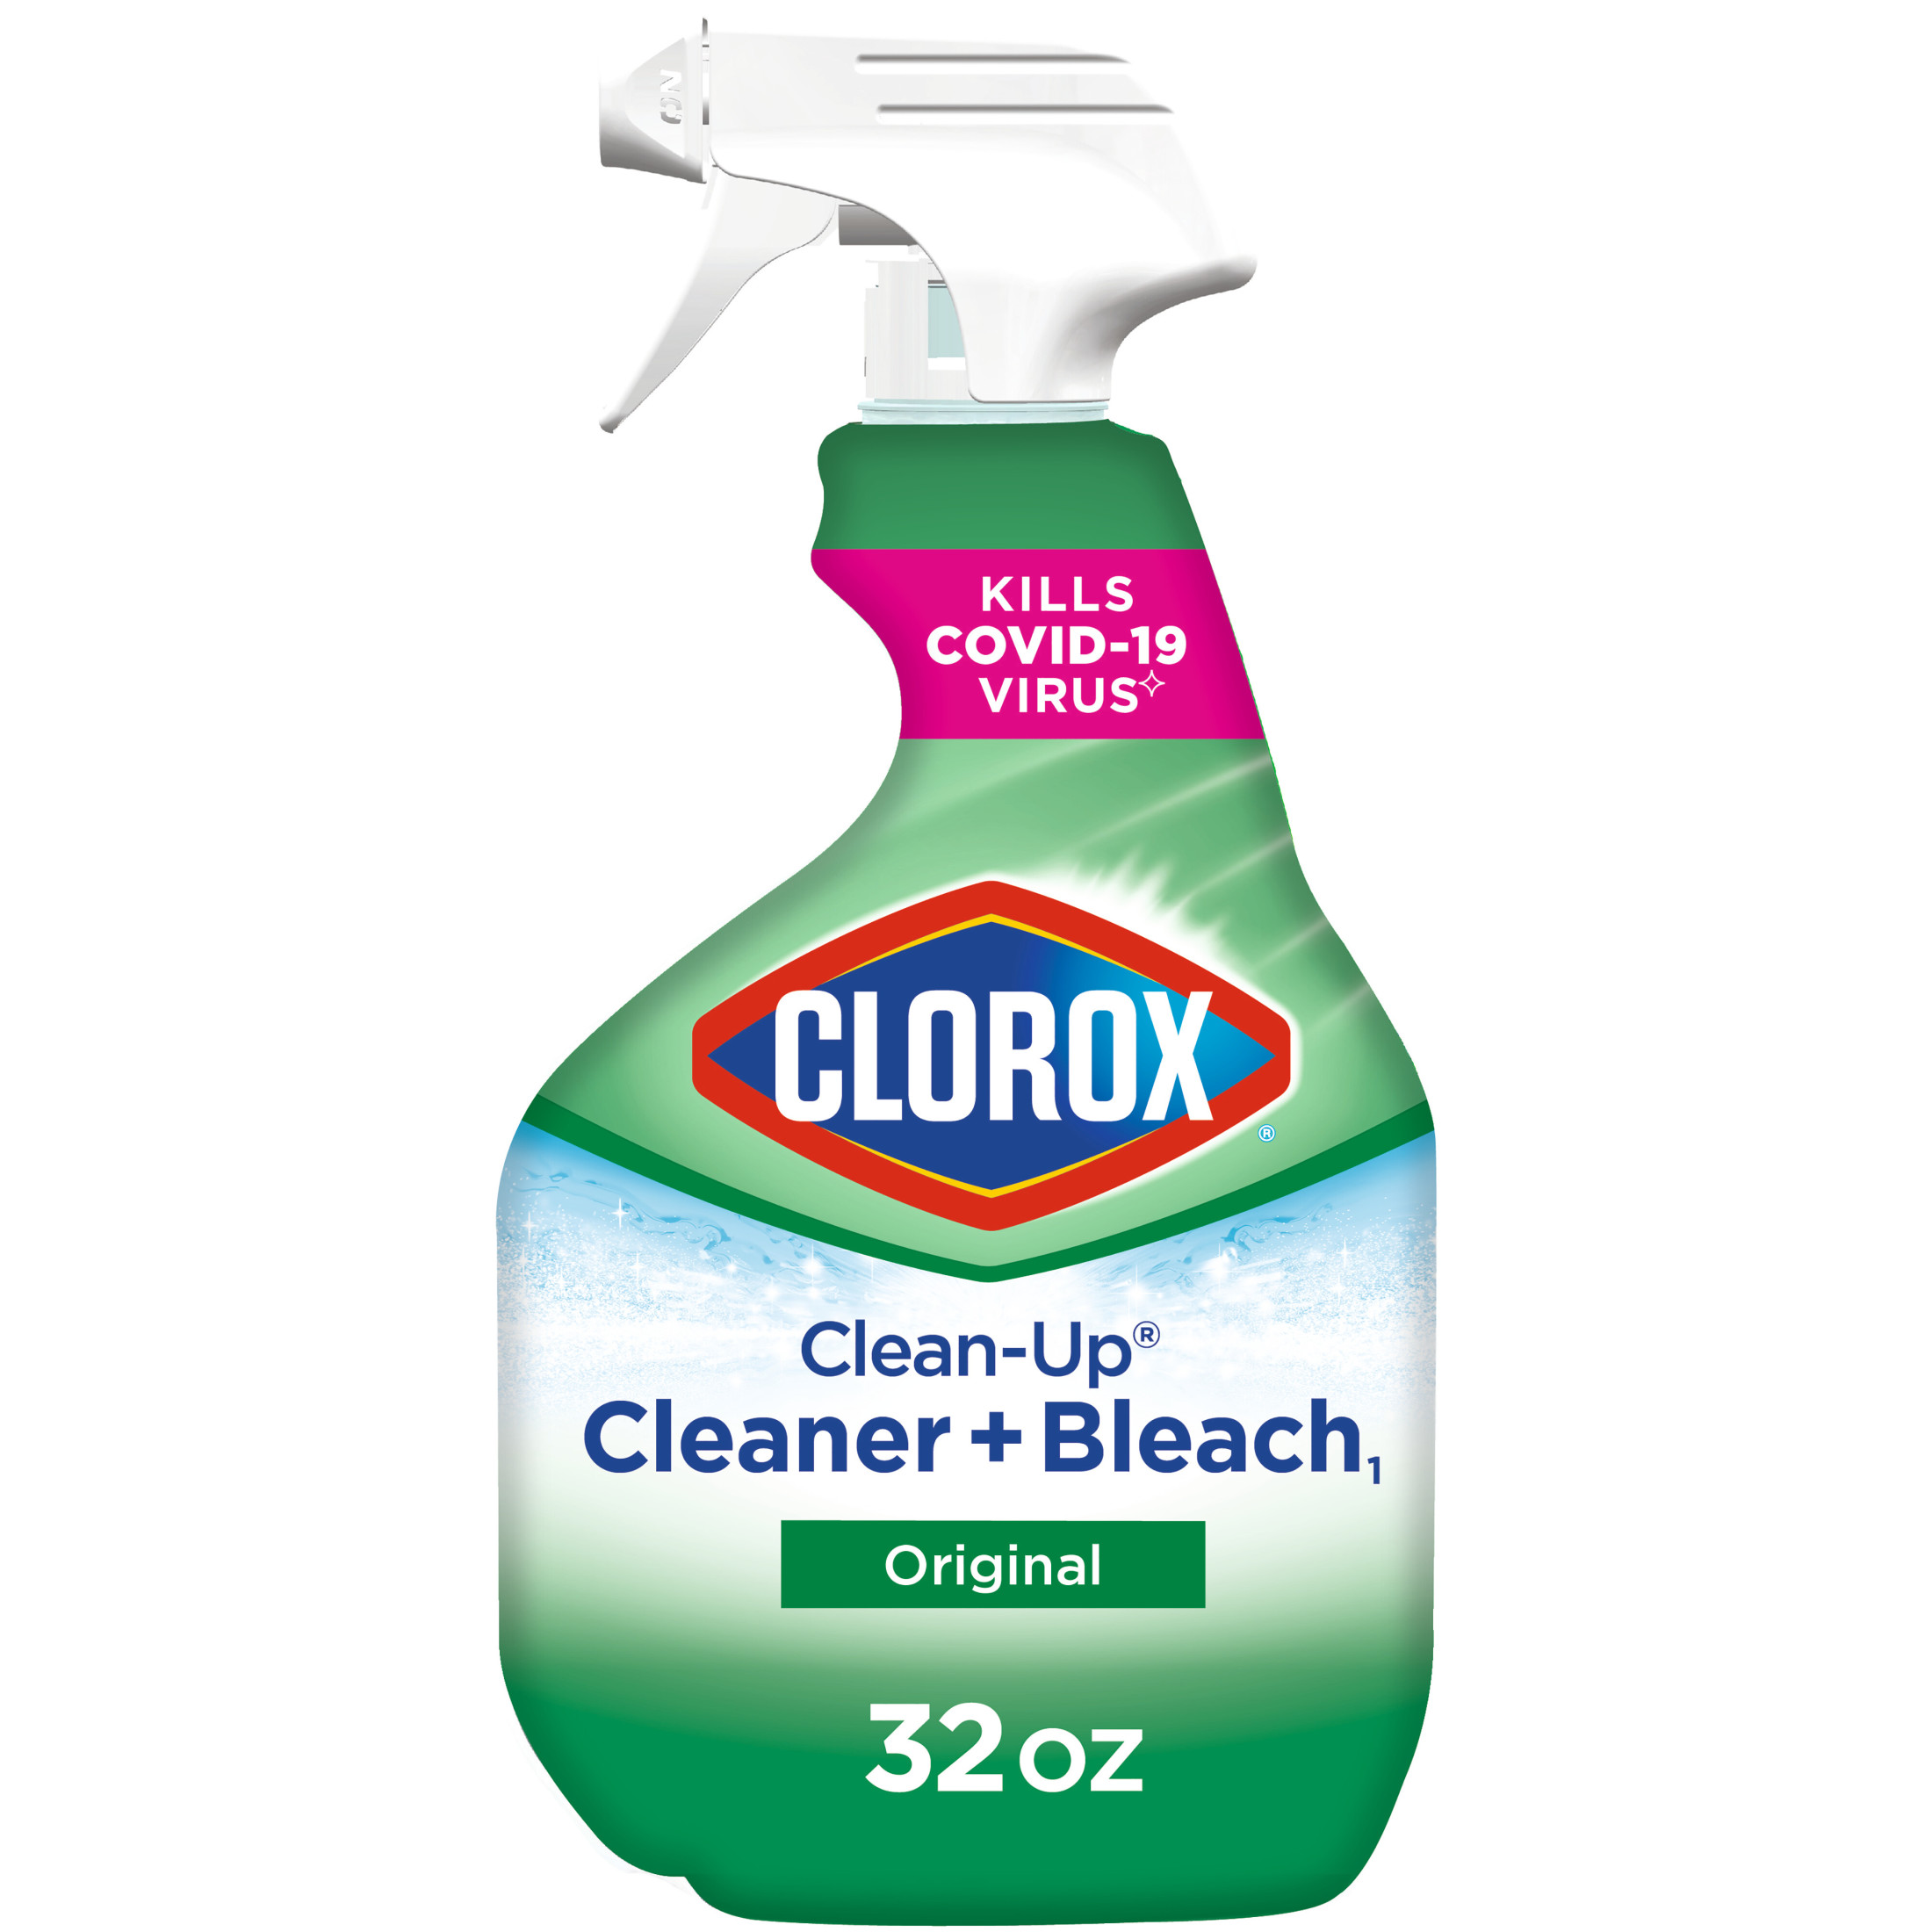 Clorox Clean-Up All Purpose Cleaner with Bleach, Spray Bottle, Original, 32 oz - image 1 of 13